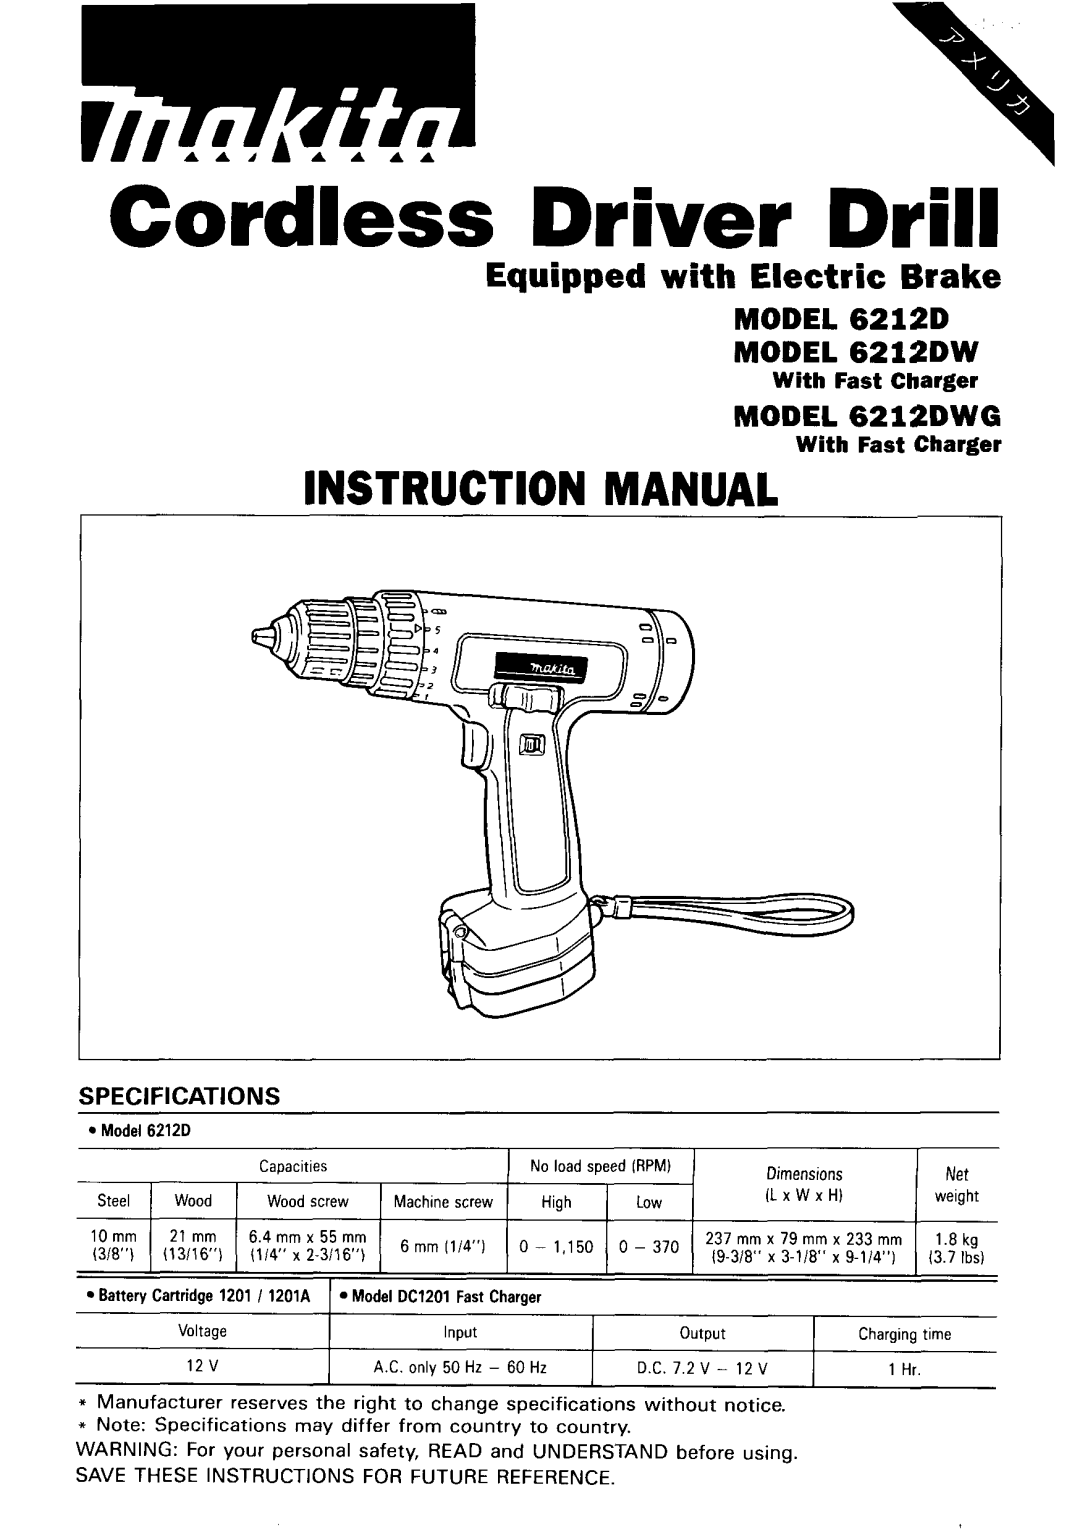 Makita specifications Instruction Manual, Equipped with Electric Brake, MODEL 6212D MODEL 6212DW, MODEL 6212DWG, 1 Hr 